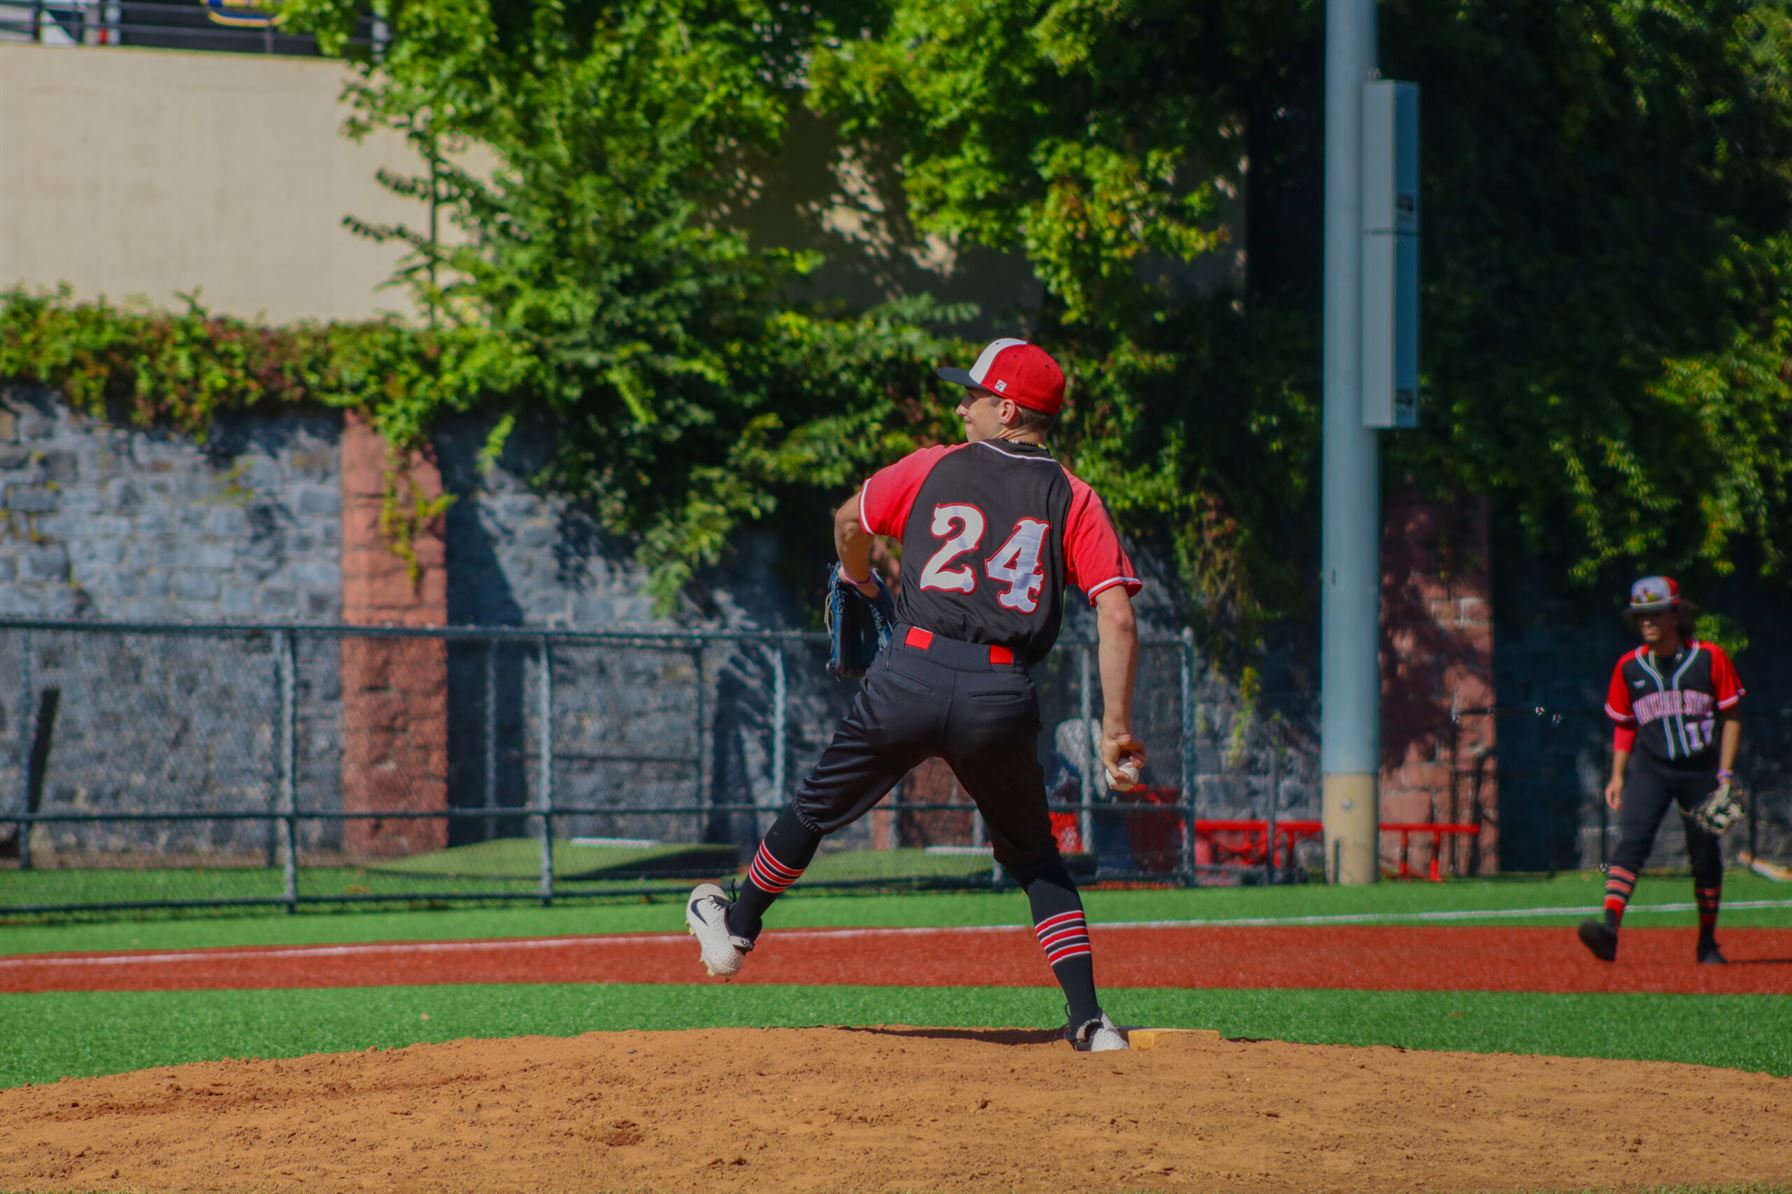 Pinckney winding up for a pitch for Montclair State University Club Baseball. Photo courtesy of Billy Pinckney